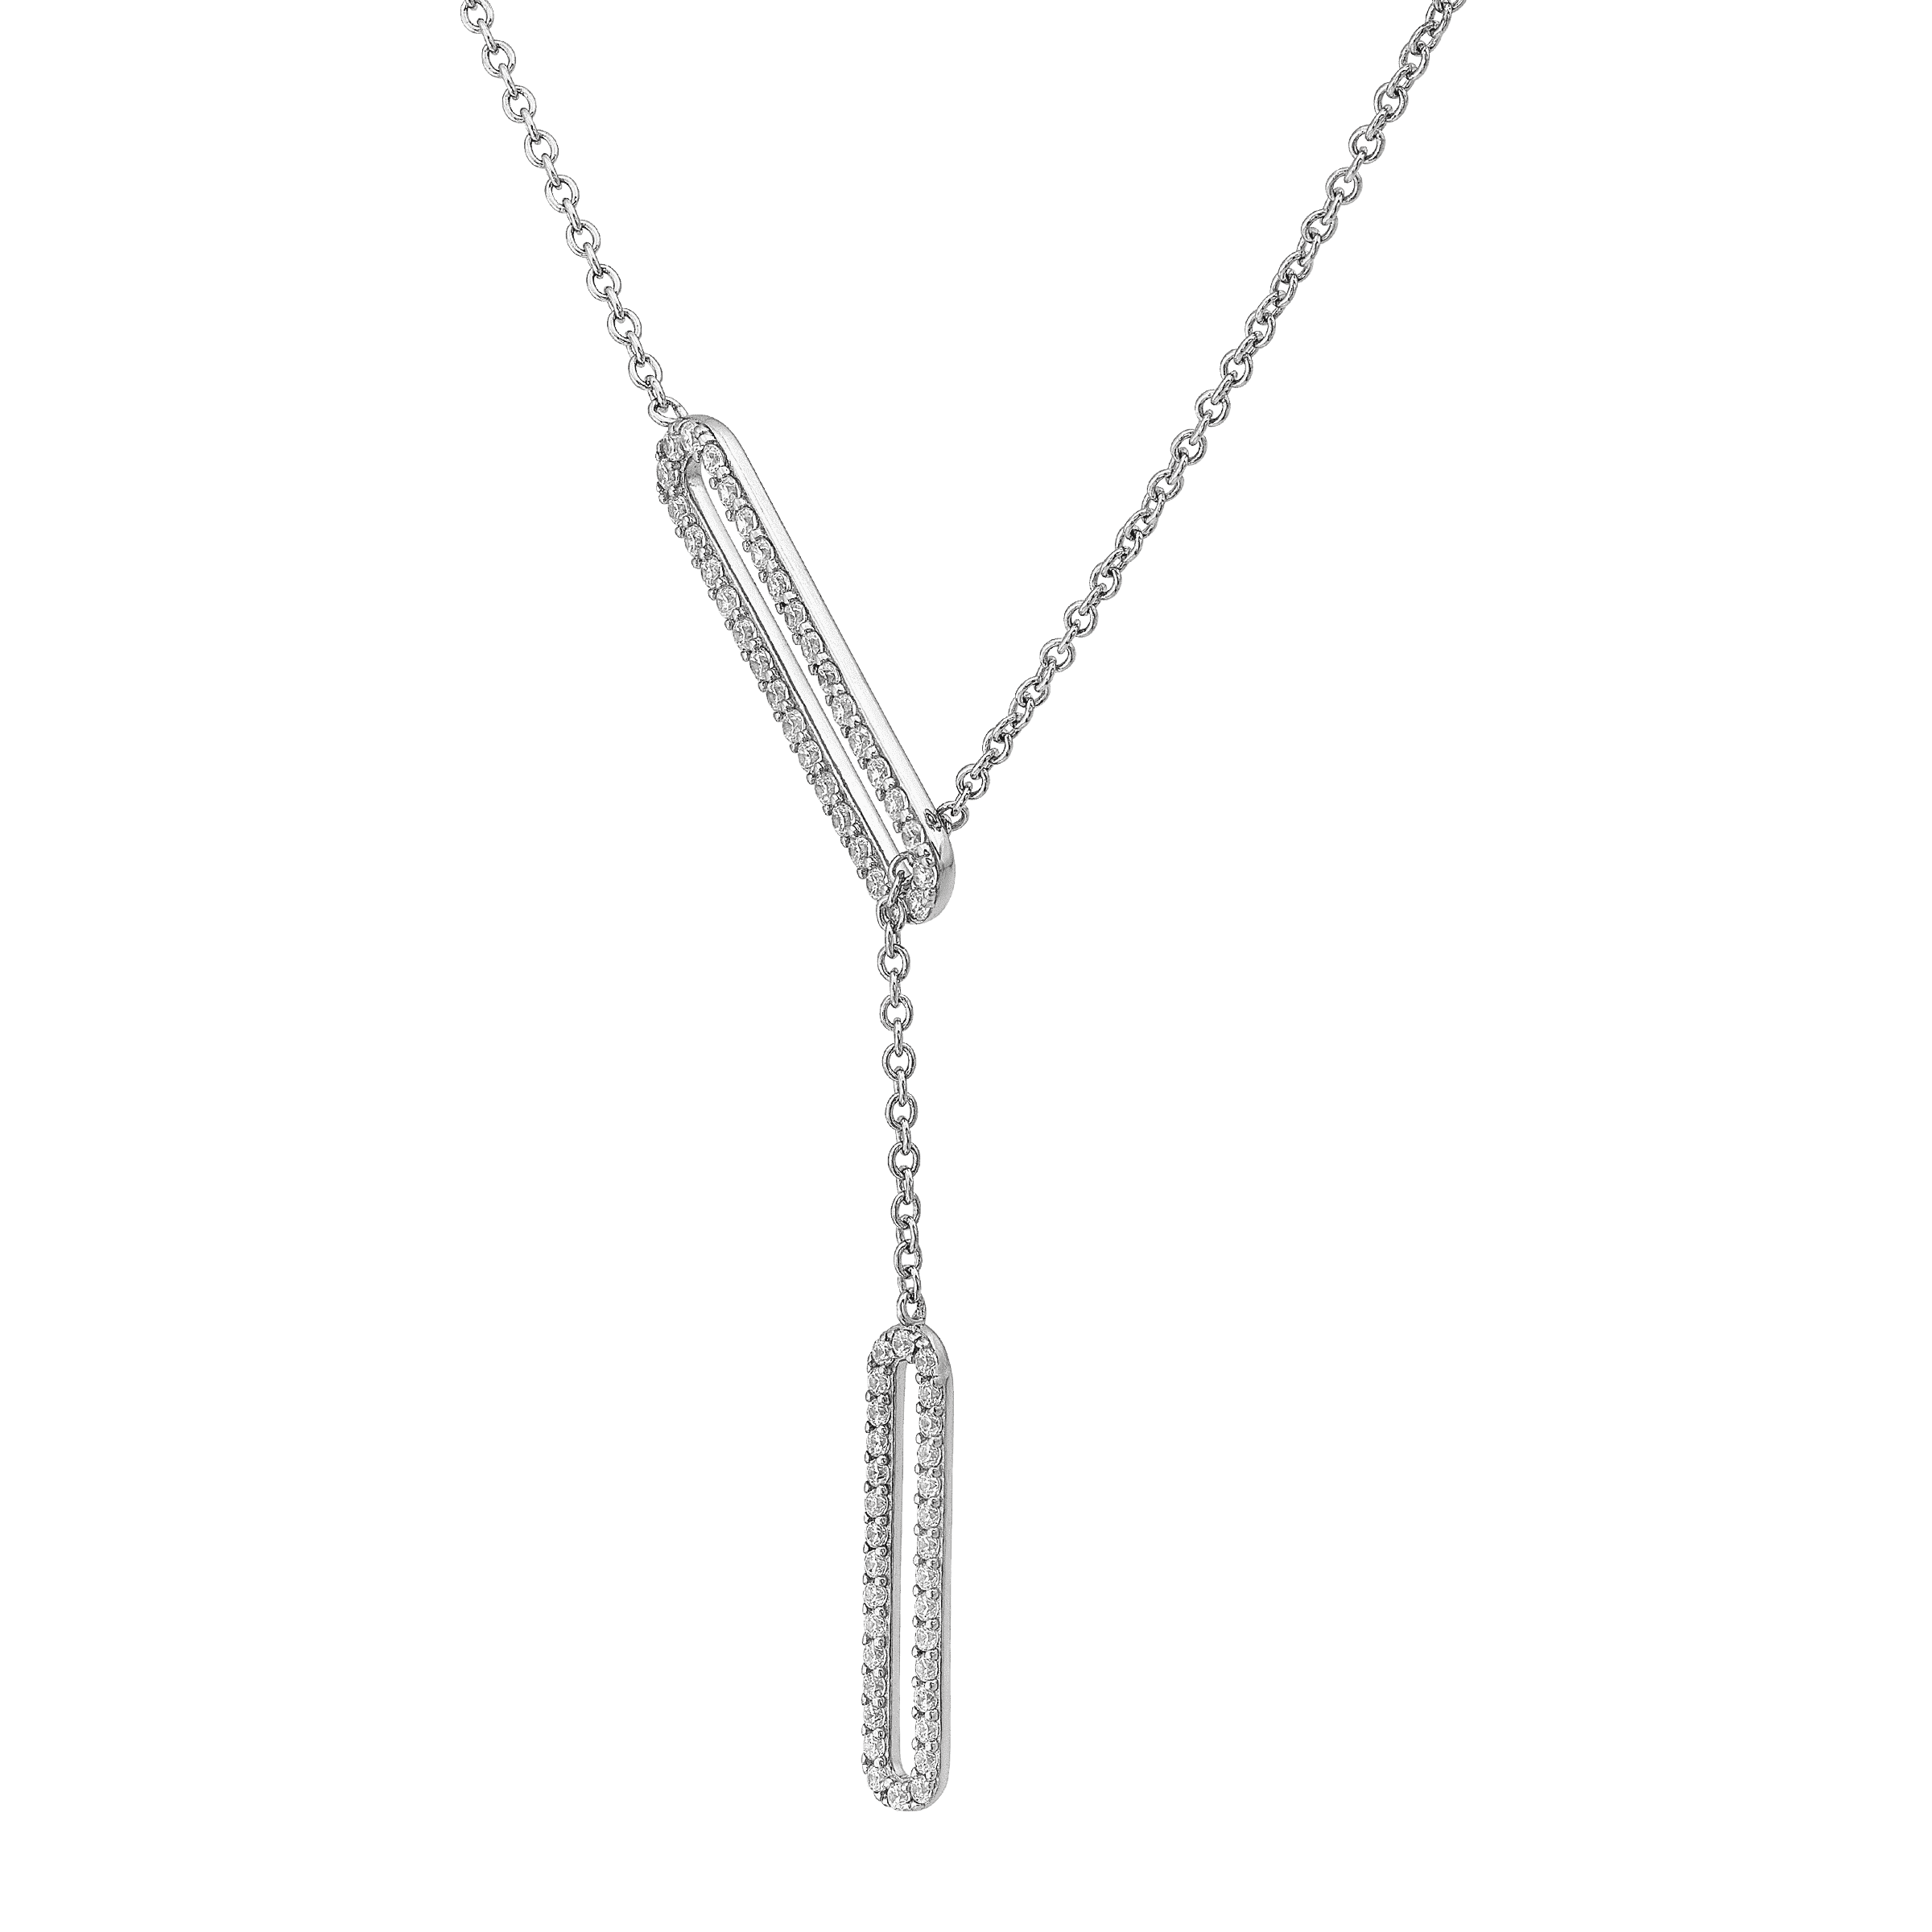 Silver Lock Chain Necklace – JUINCOLLECTION